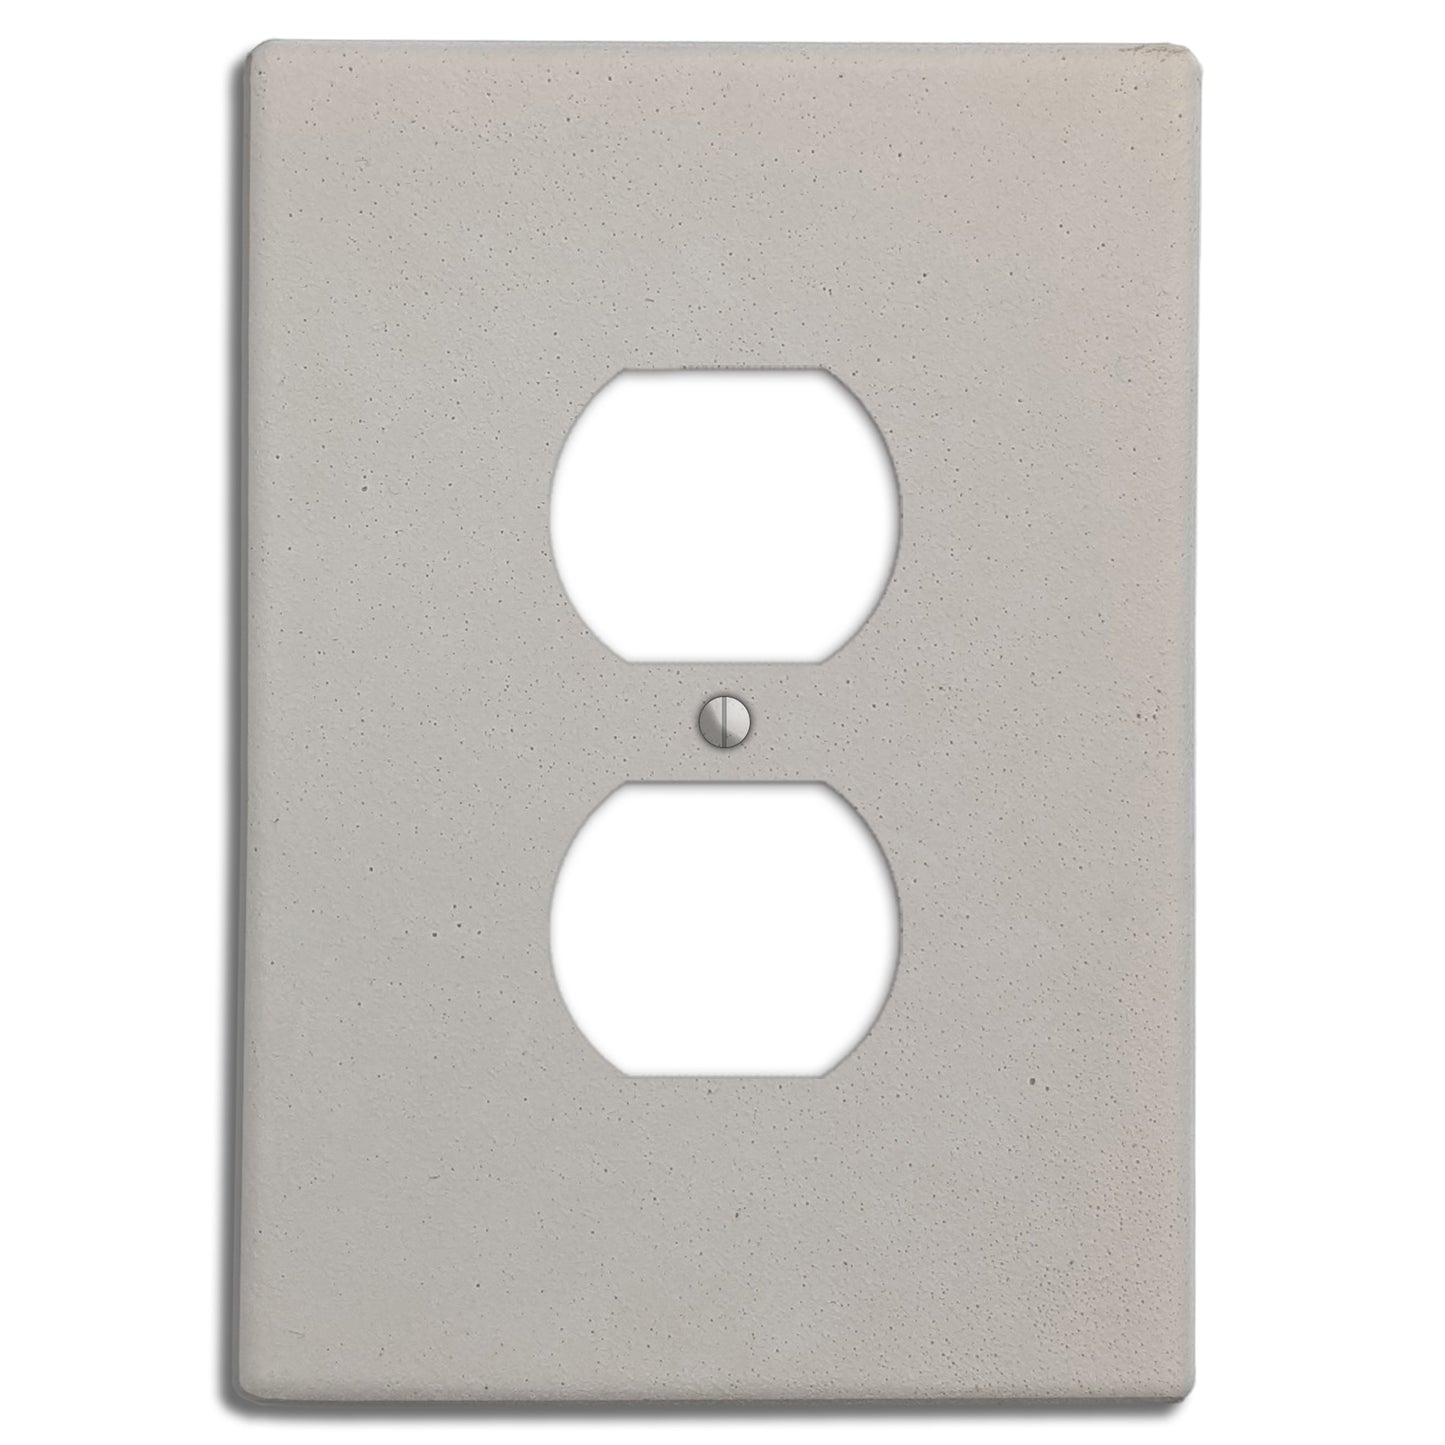 White Boho Smooth Duplex Outlet Cover Plate